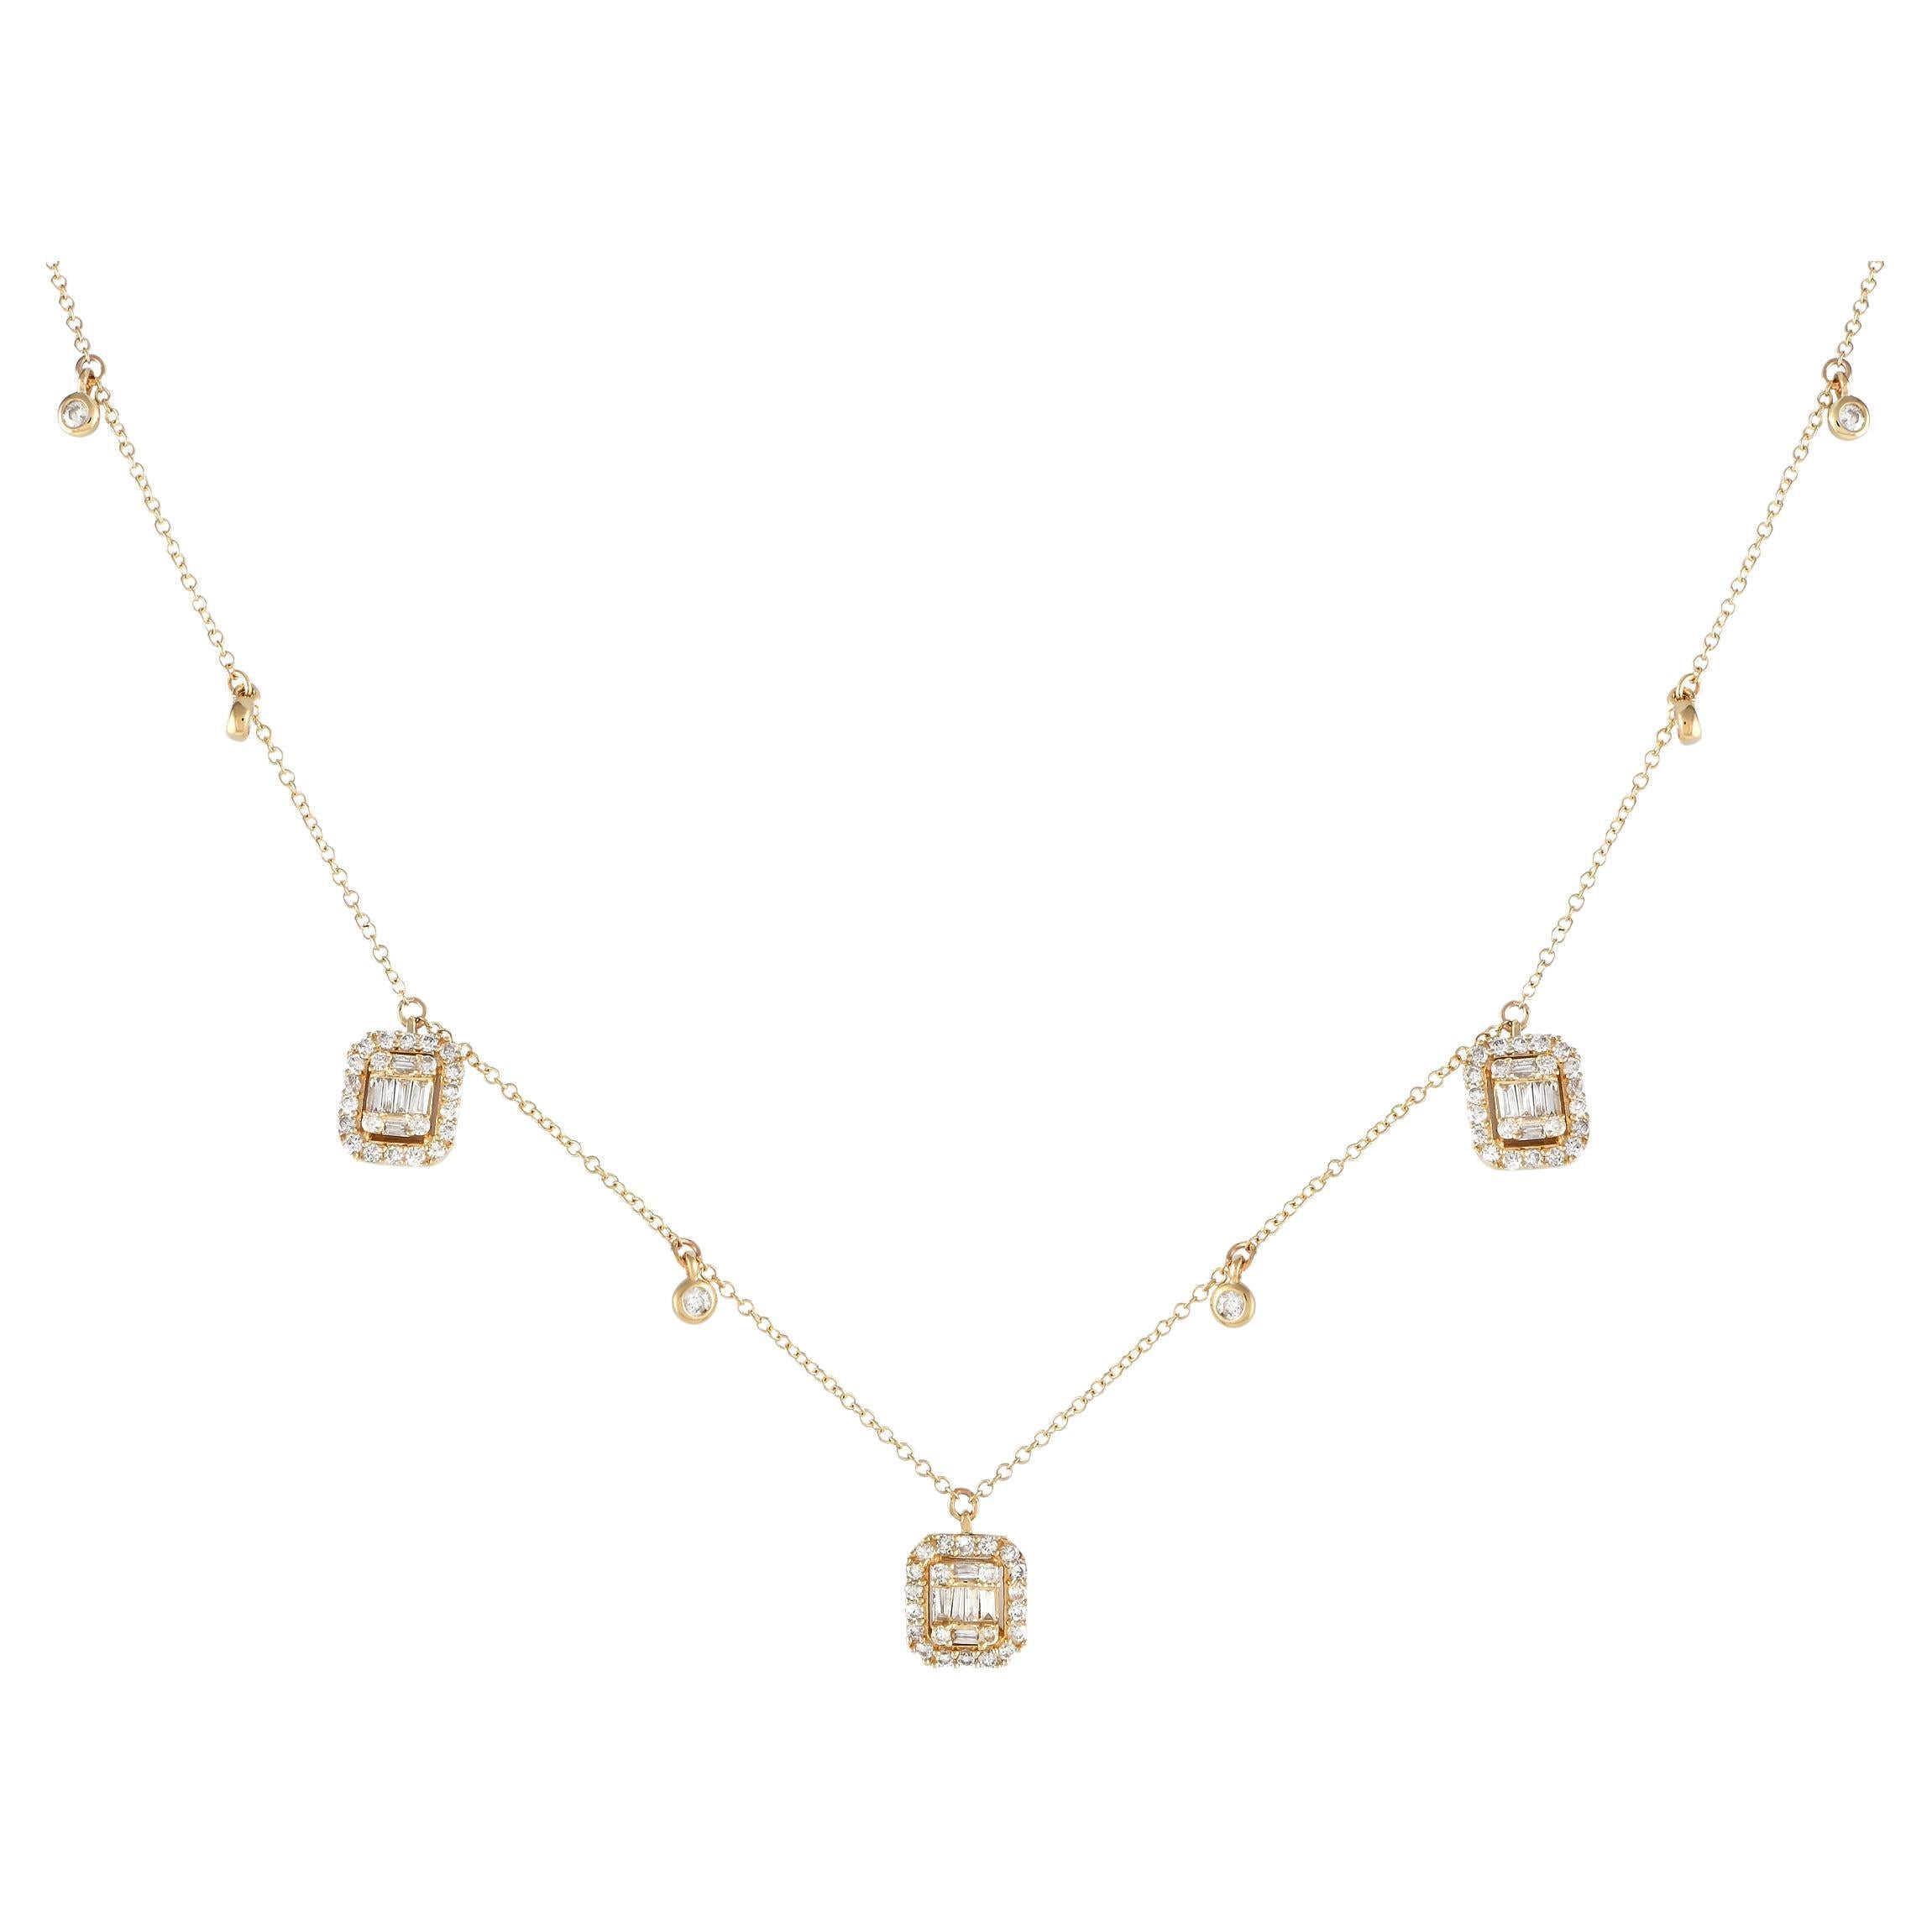 LB Exclusive 14K Yellow Gold 0.58ct Diamond Station Necklace PN14842 For Sale